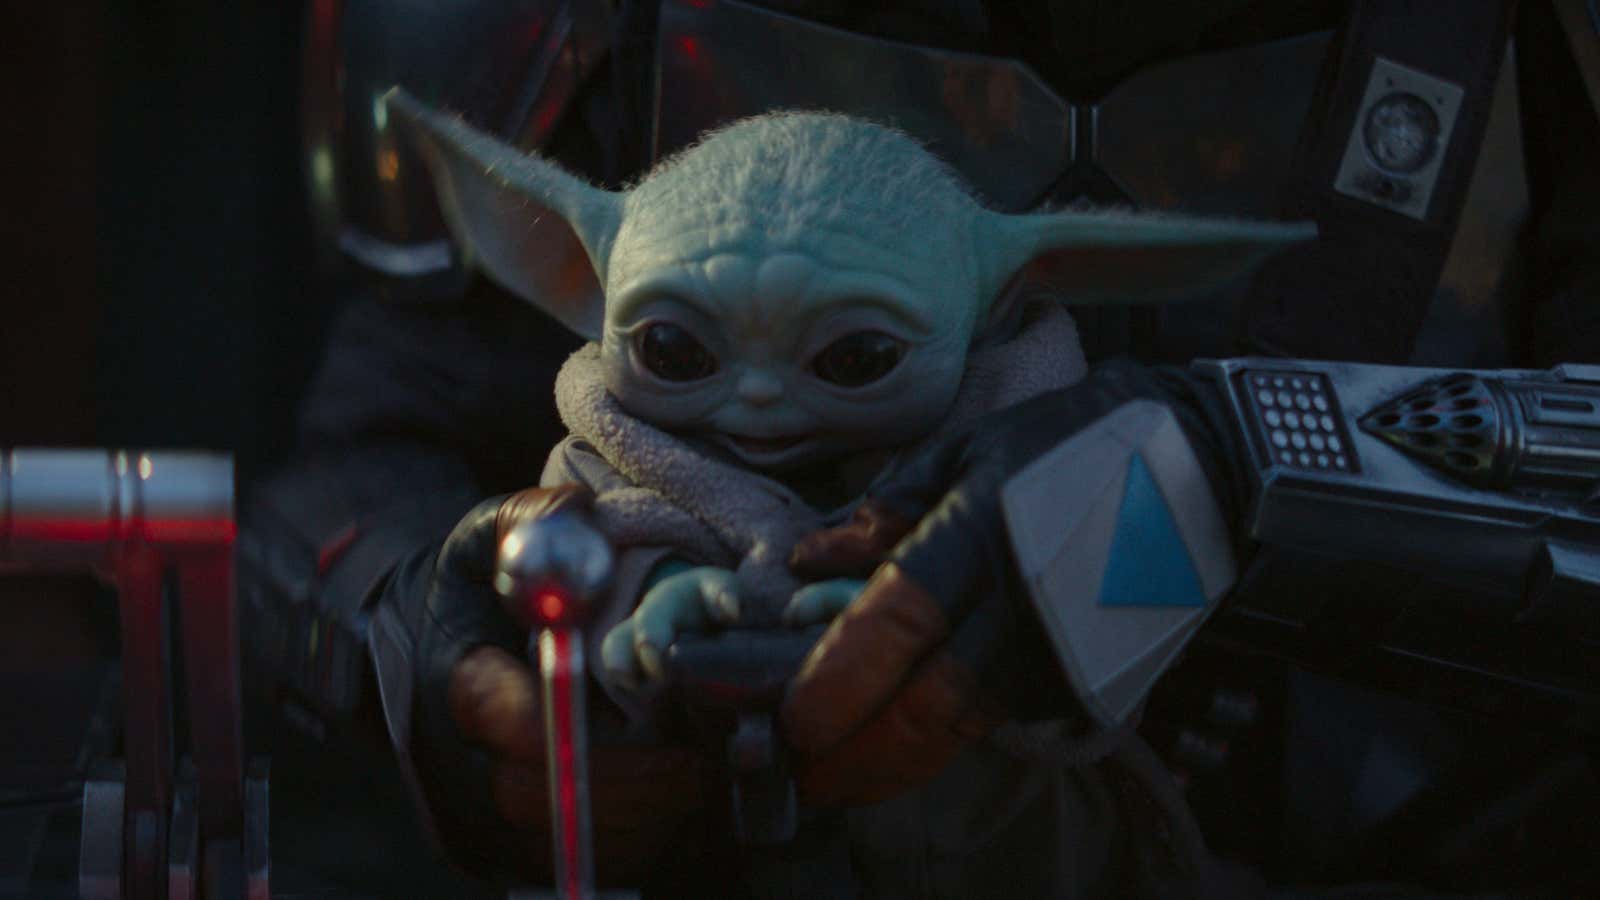 All smiles for Baby Yoda.